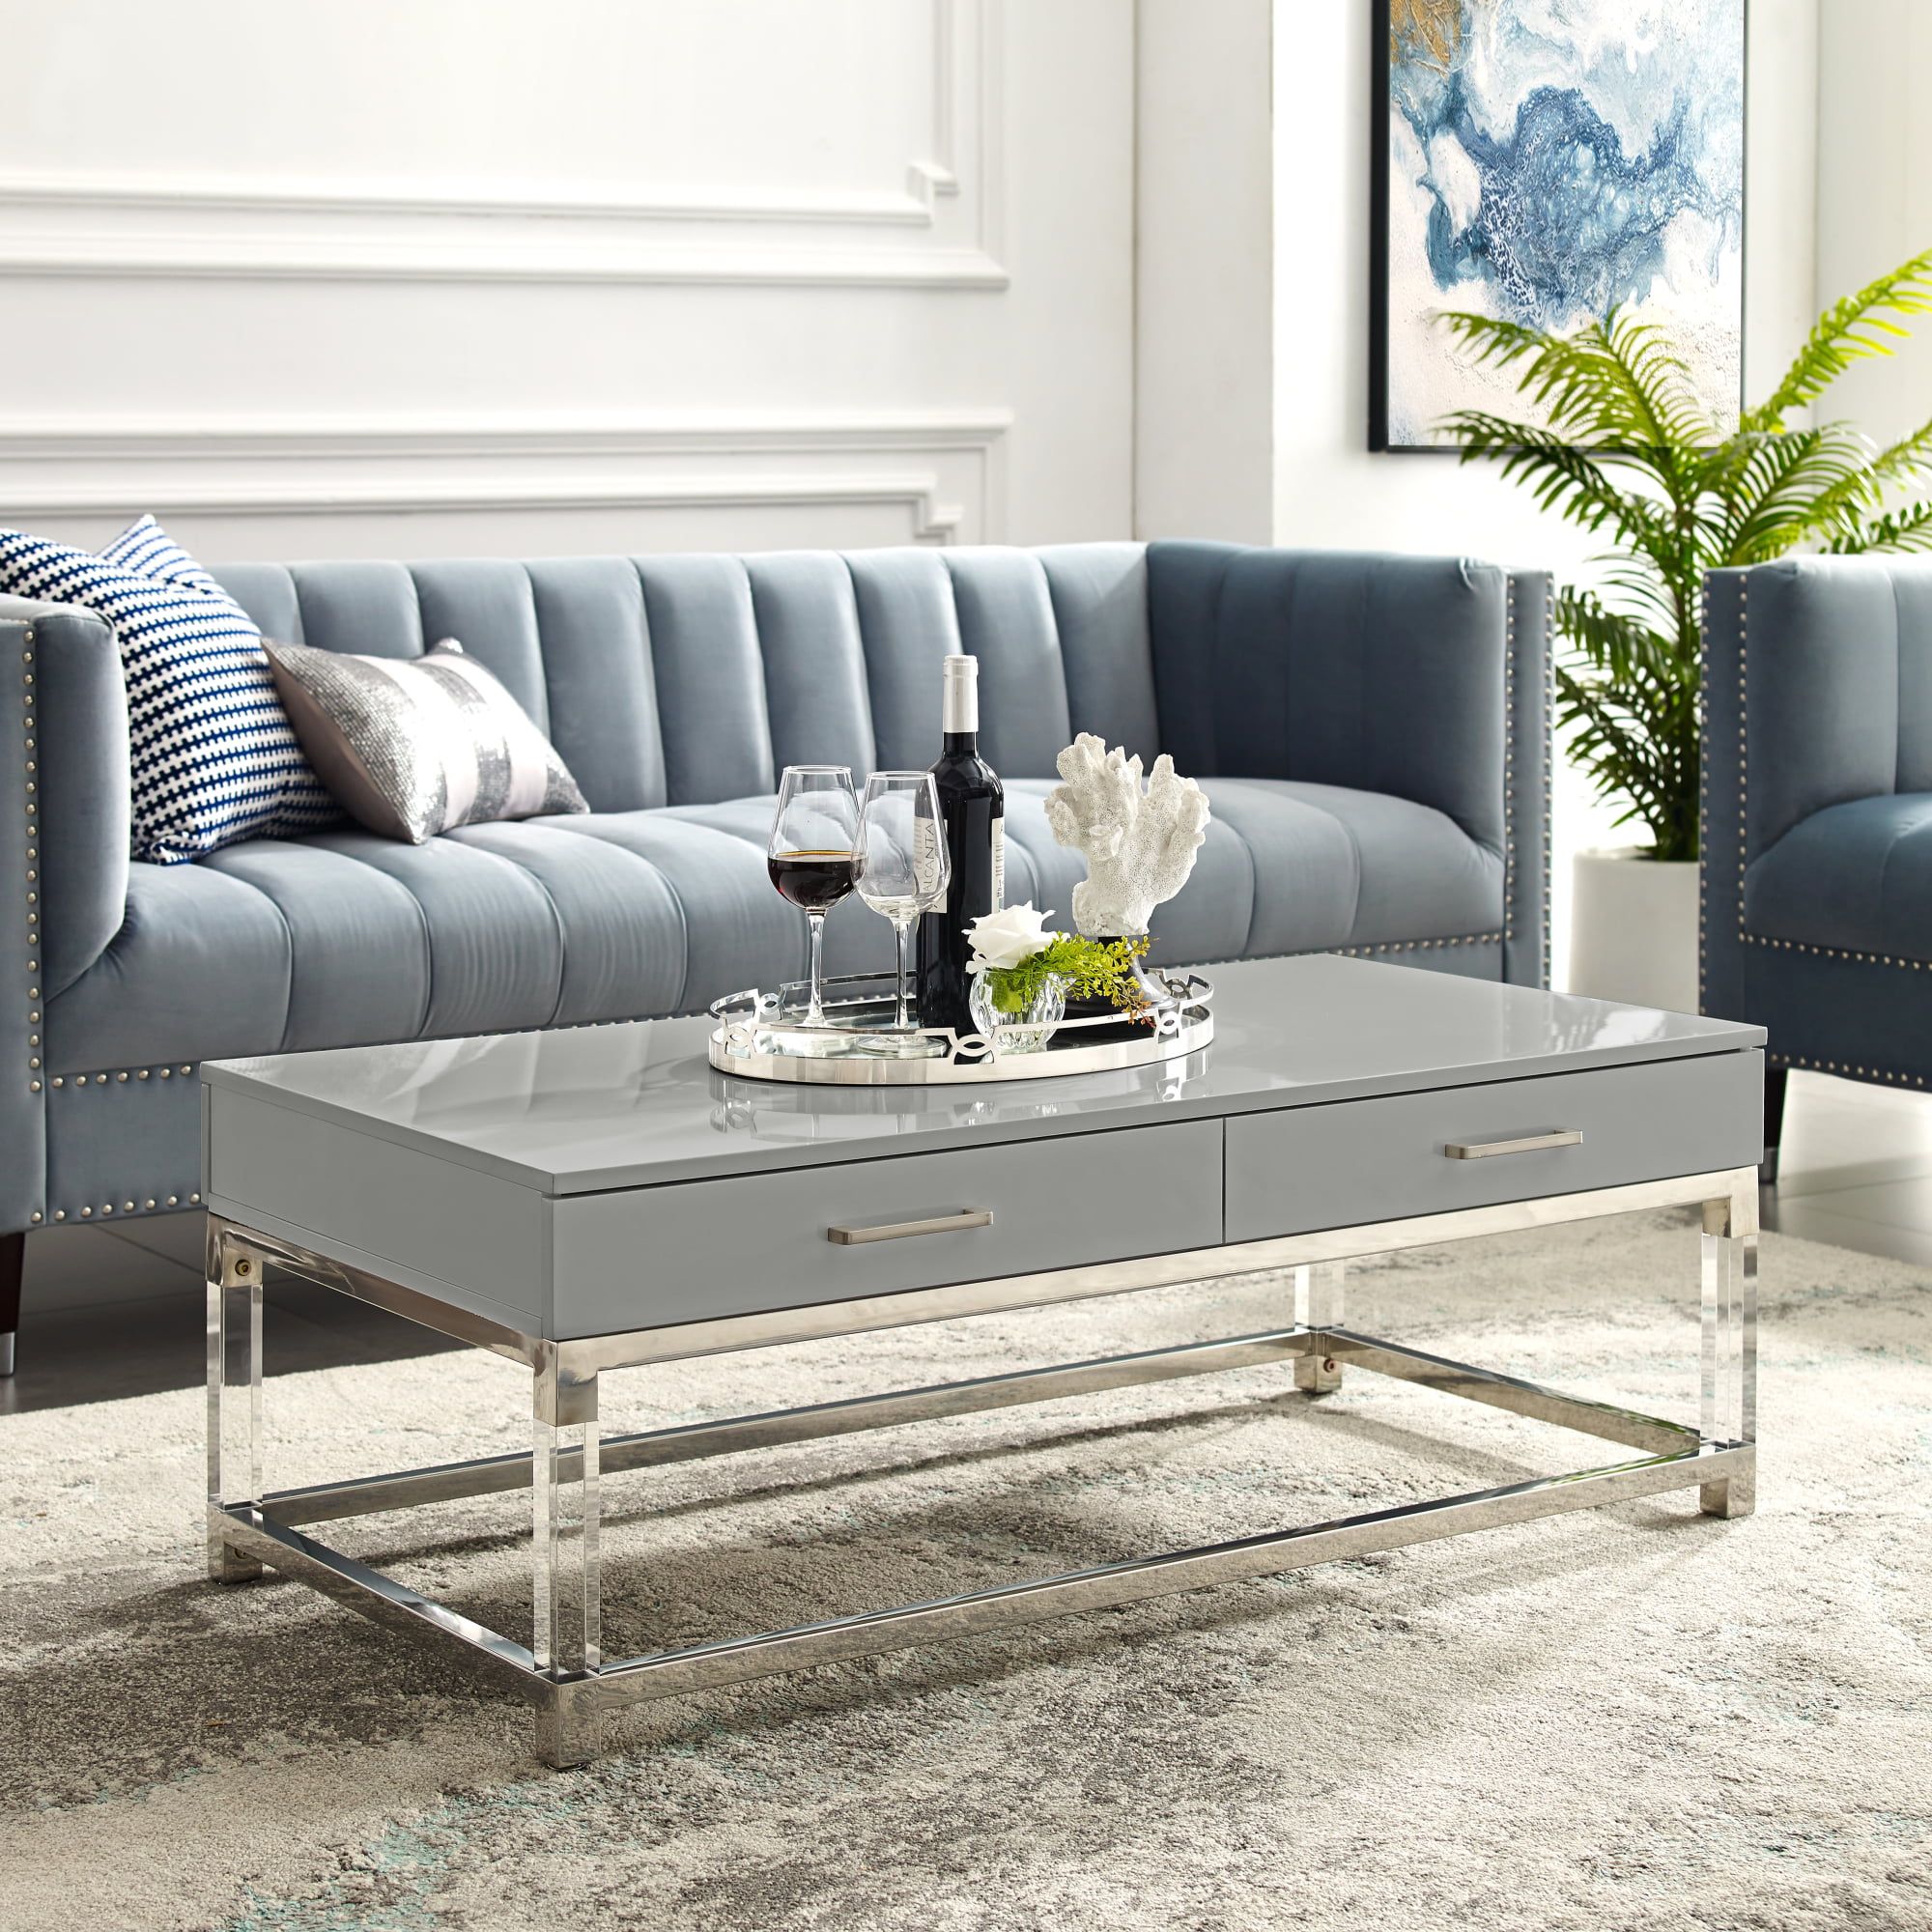 Alena Grey Coffee Table – 2 Drawers | High Gloss | Acrylic Legs Throughout Glossy Finished Metal Coffee Tables (View 3 of 20)